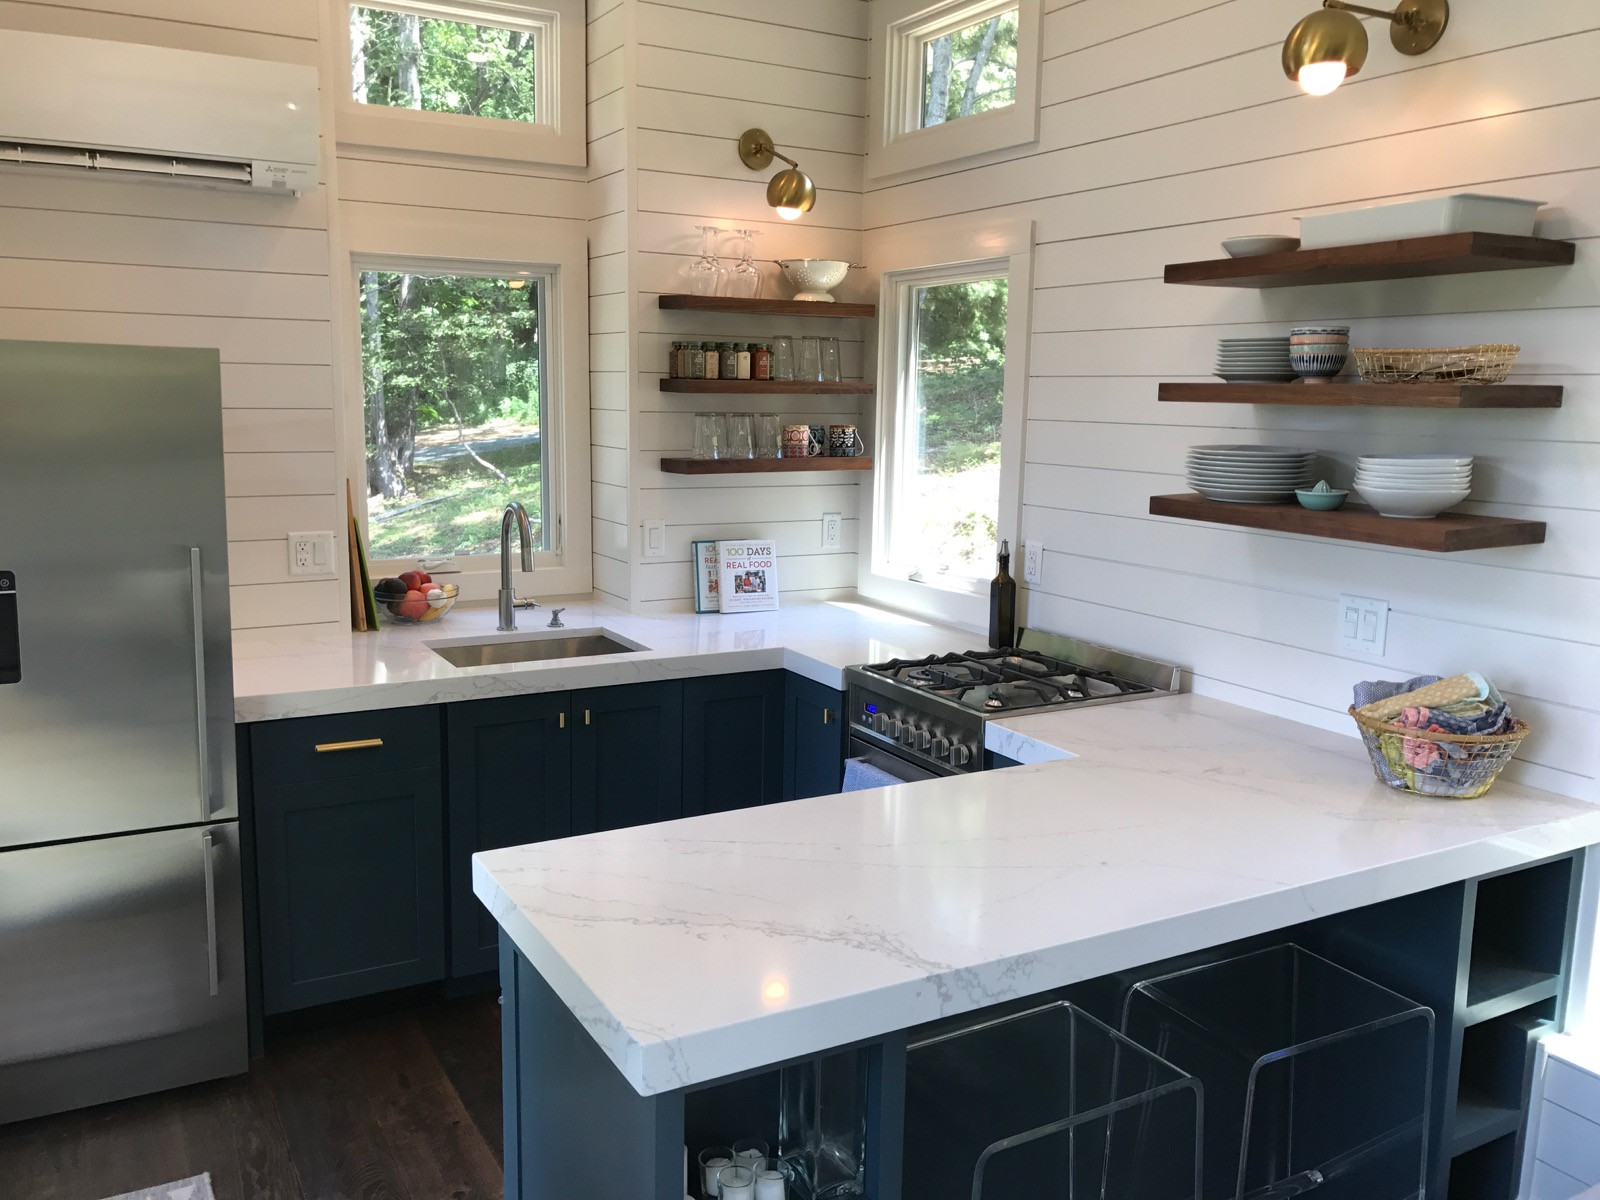 Small House Kitchens
 What s in our new Tiny House Kitchen 100 Days of Real Food